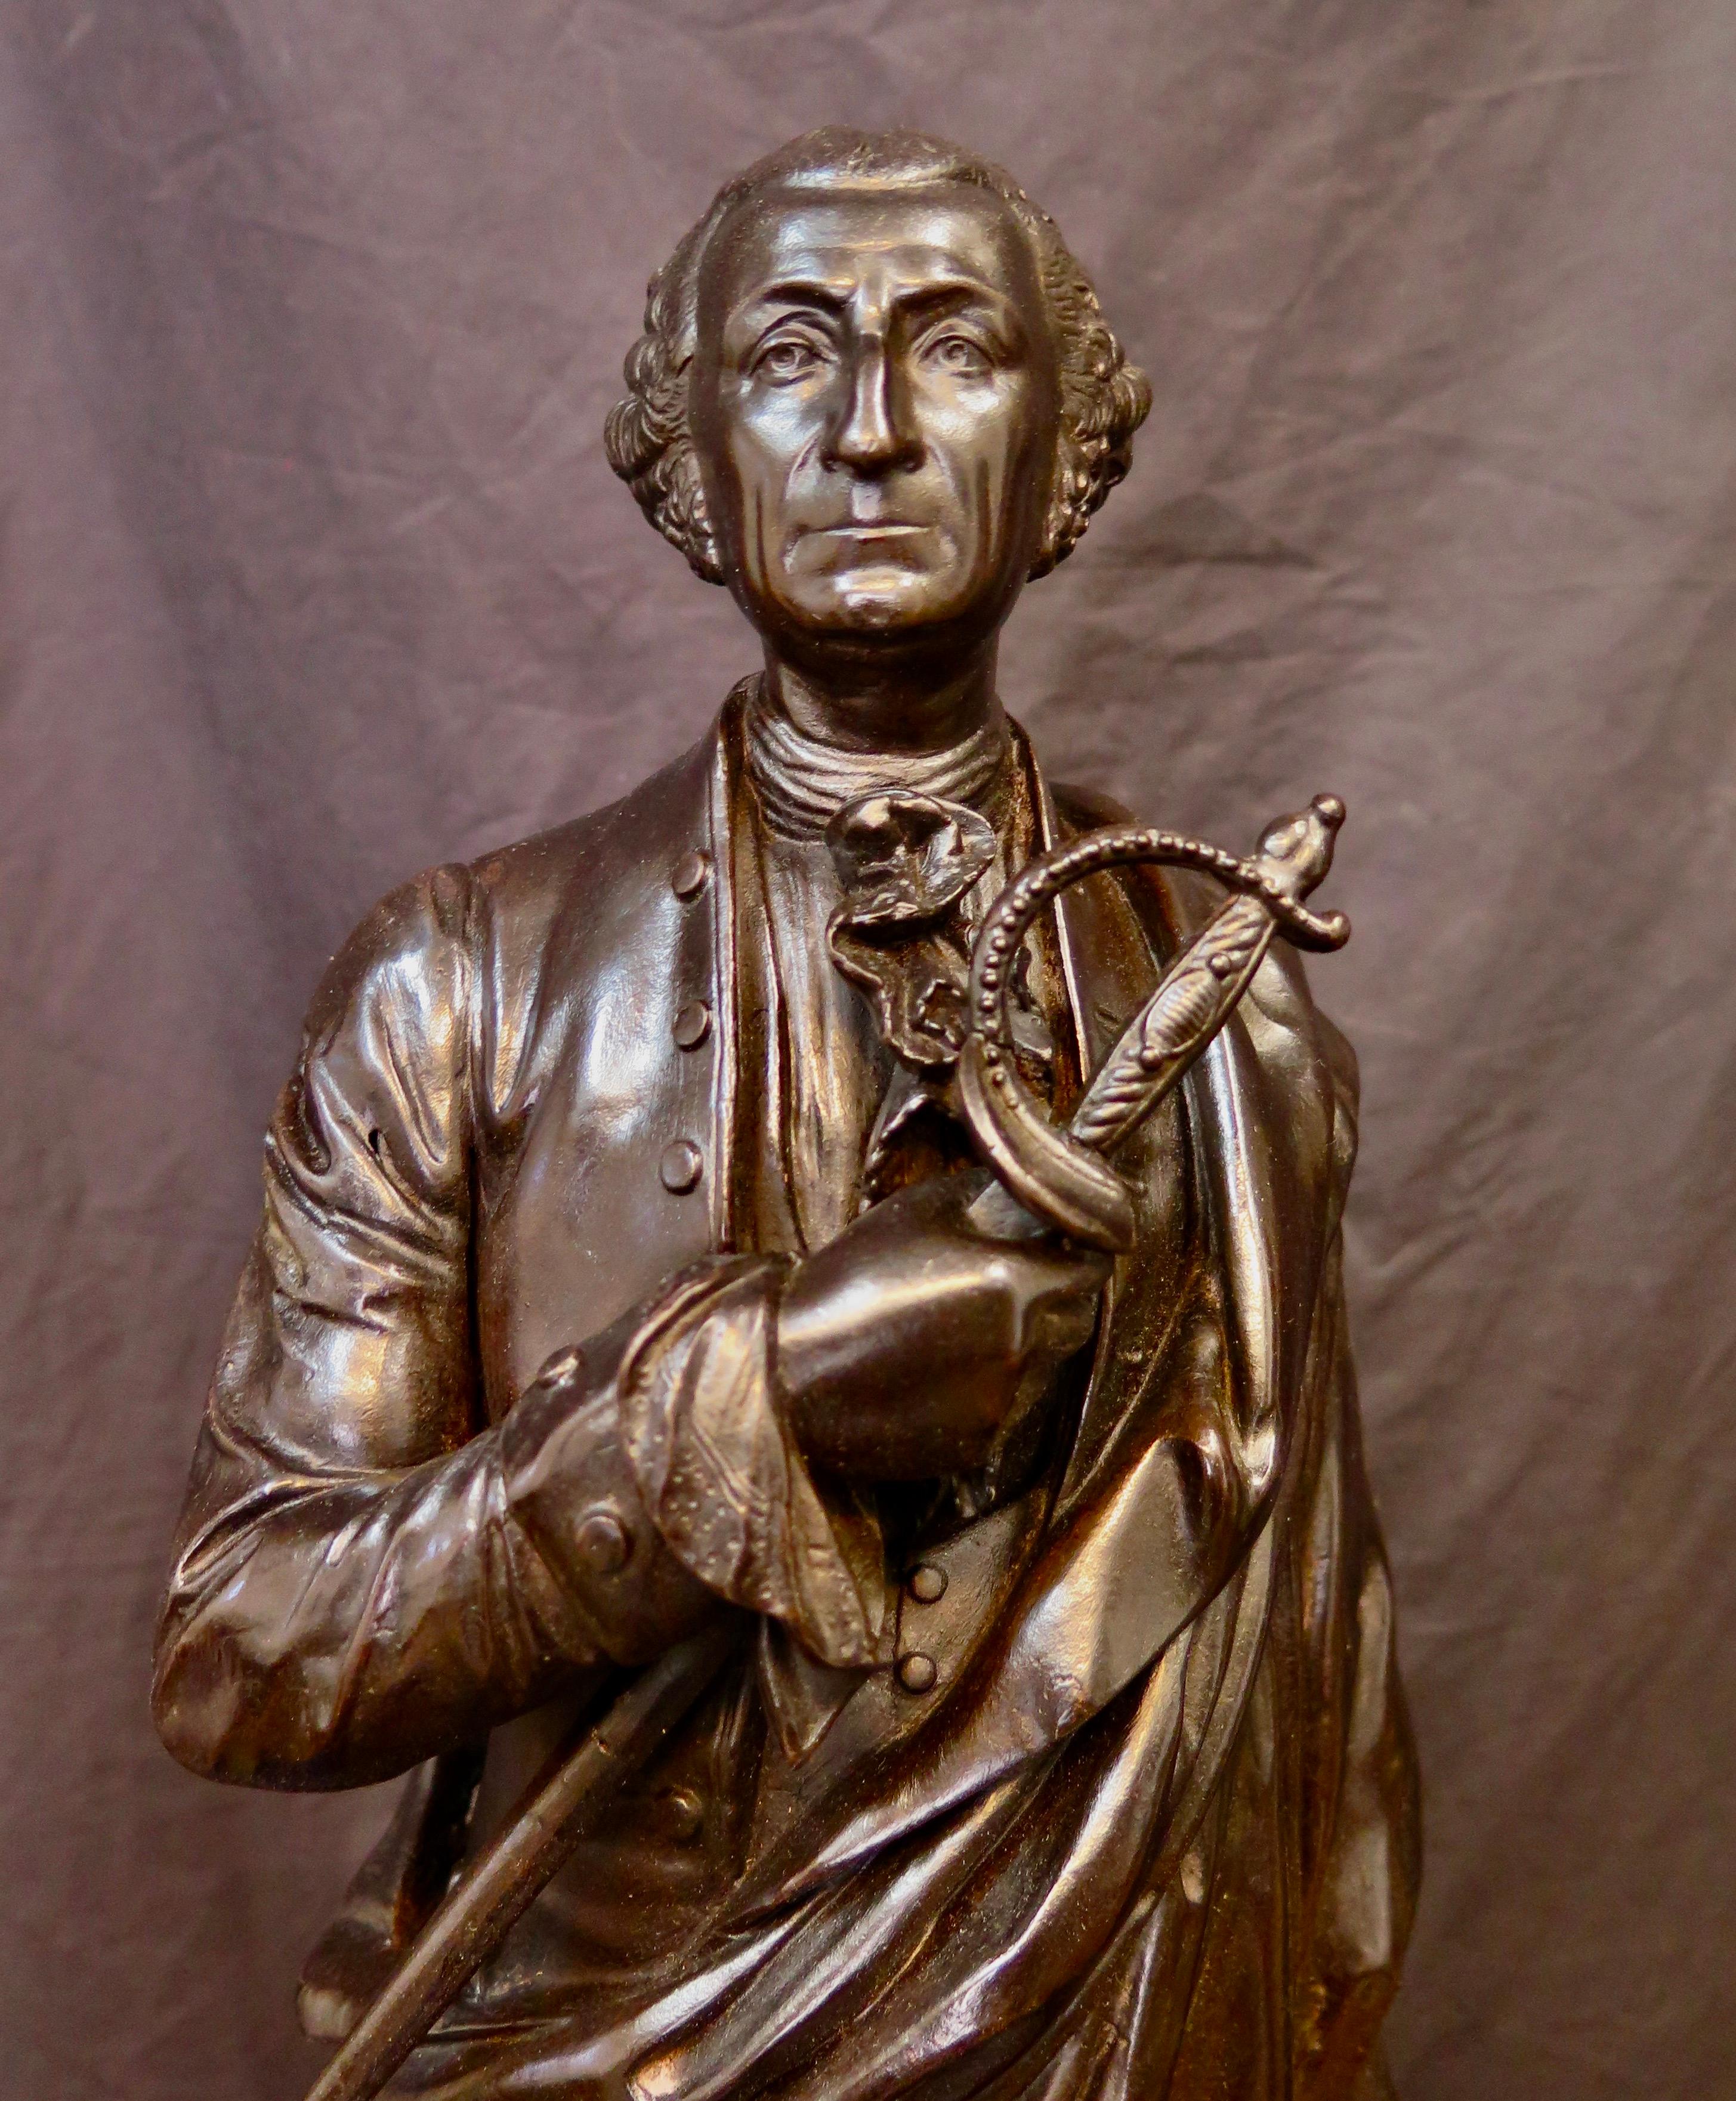 American Colonial Sculpture of George Washington